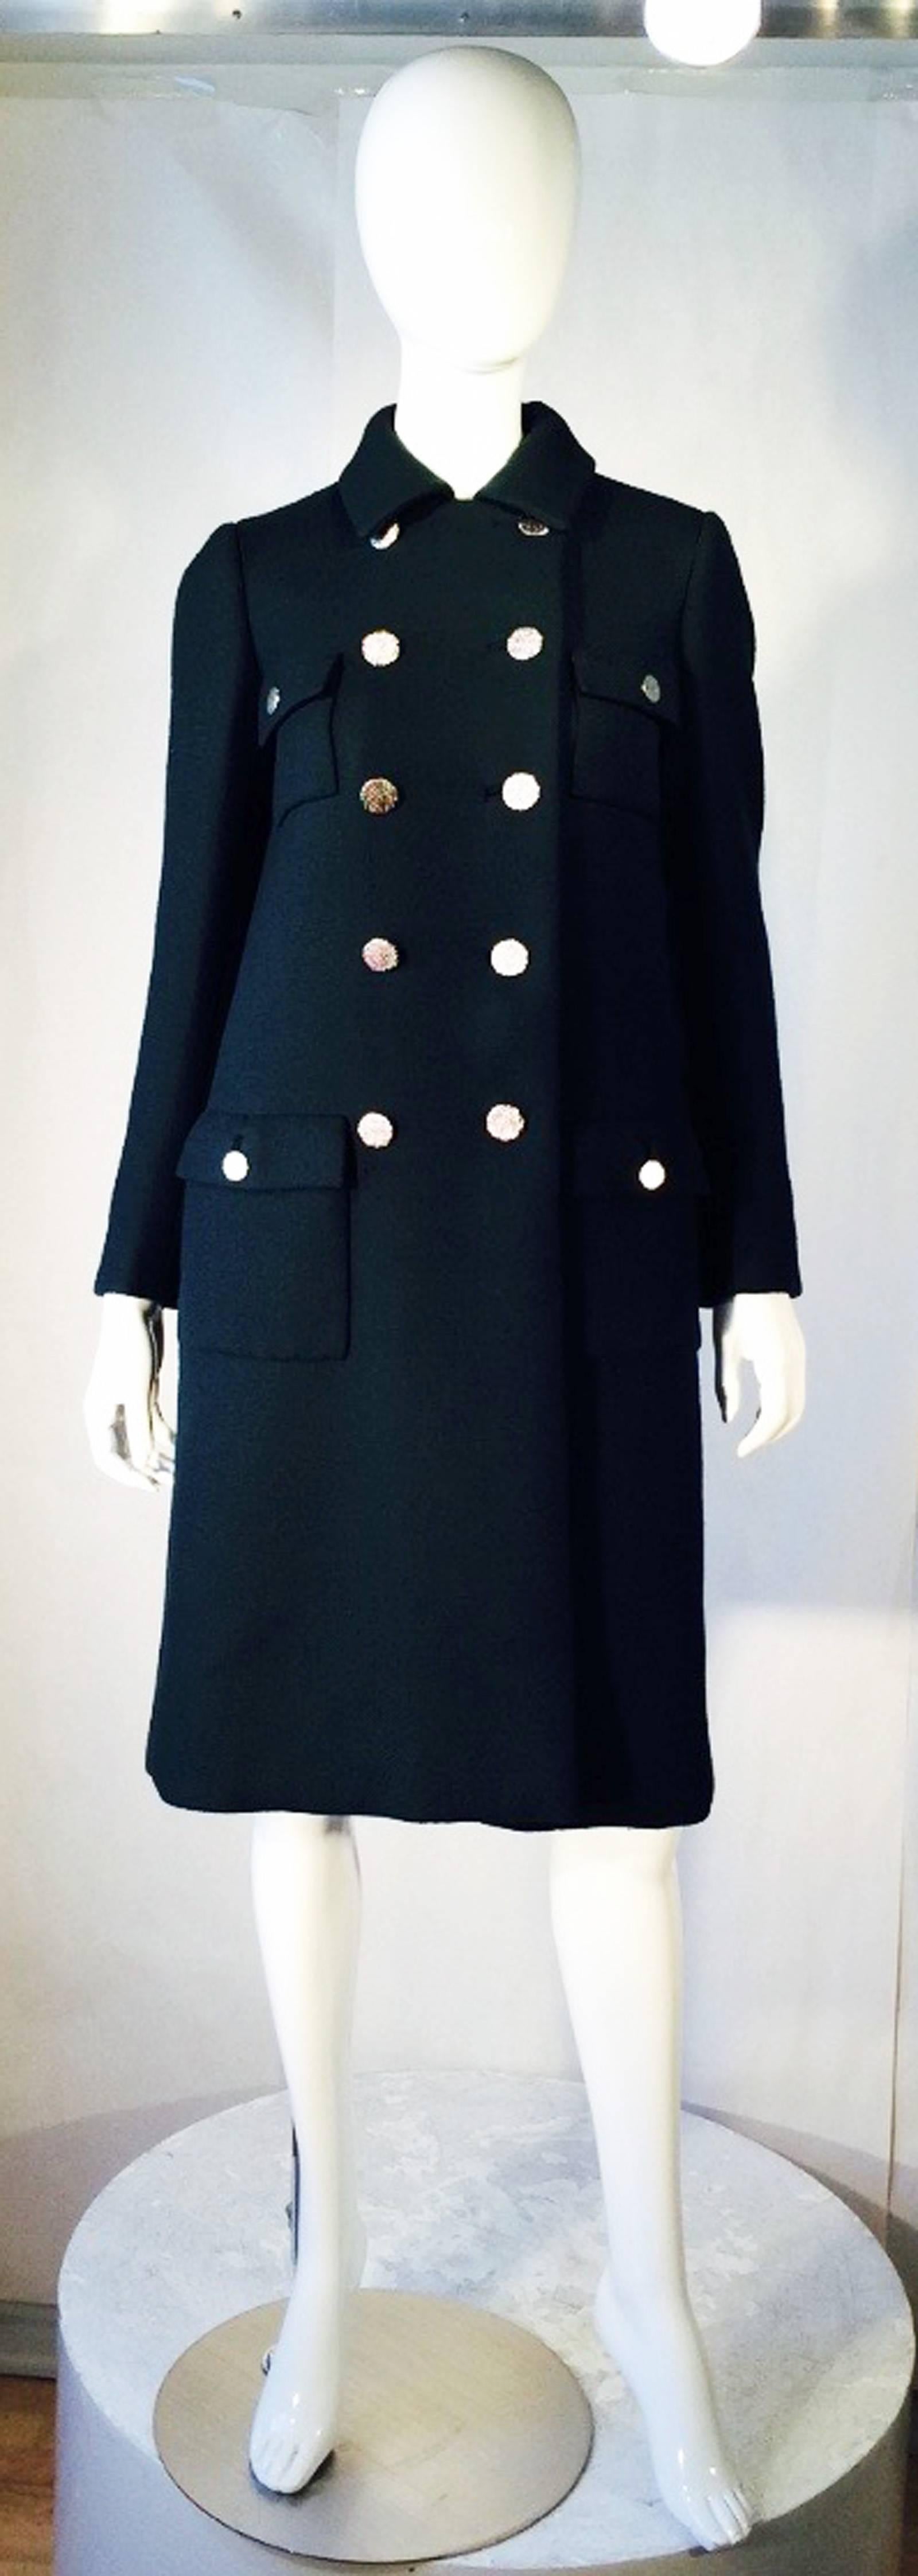 A fine and rare vintage Norman Norell military-style coat. Authentic dark green ribbed woven wool fabric item fully silk lined with a double breasted button front, attached half back belt and square patch pockets. Original sculpted silver-tone metal